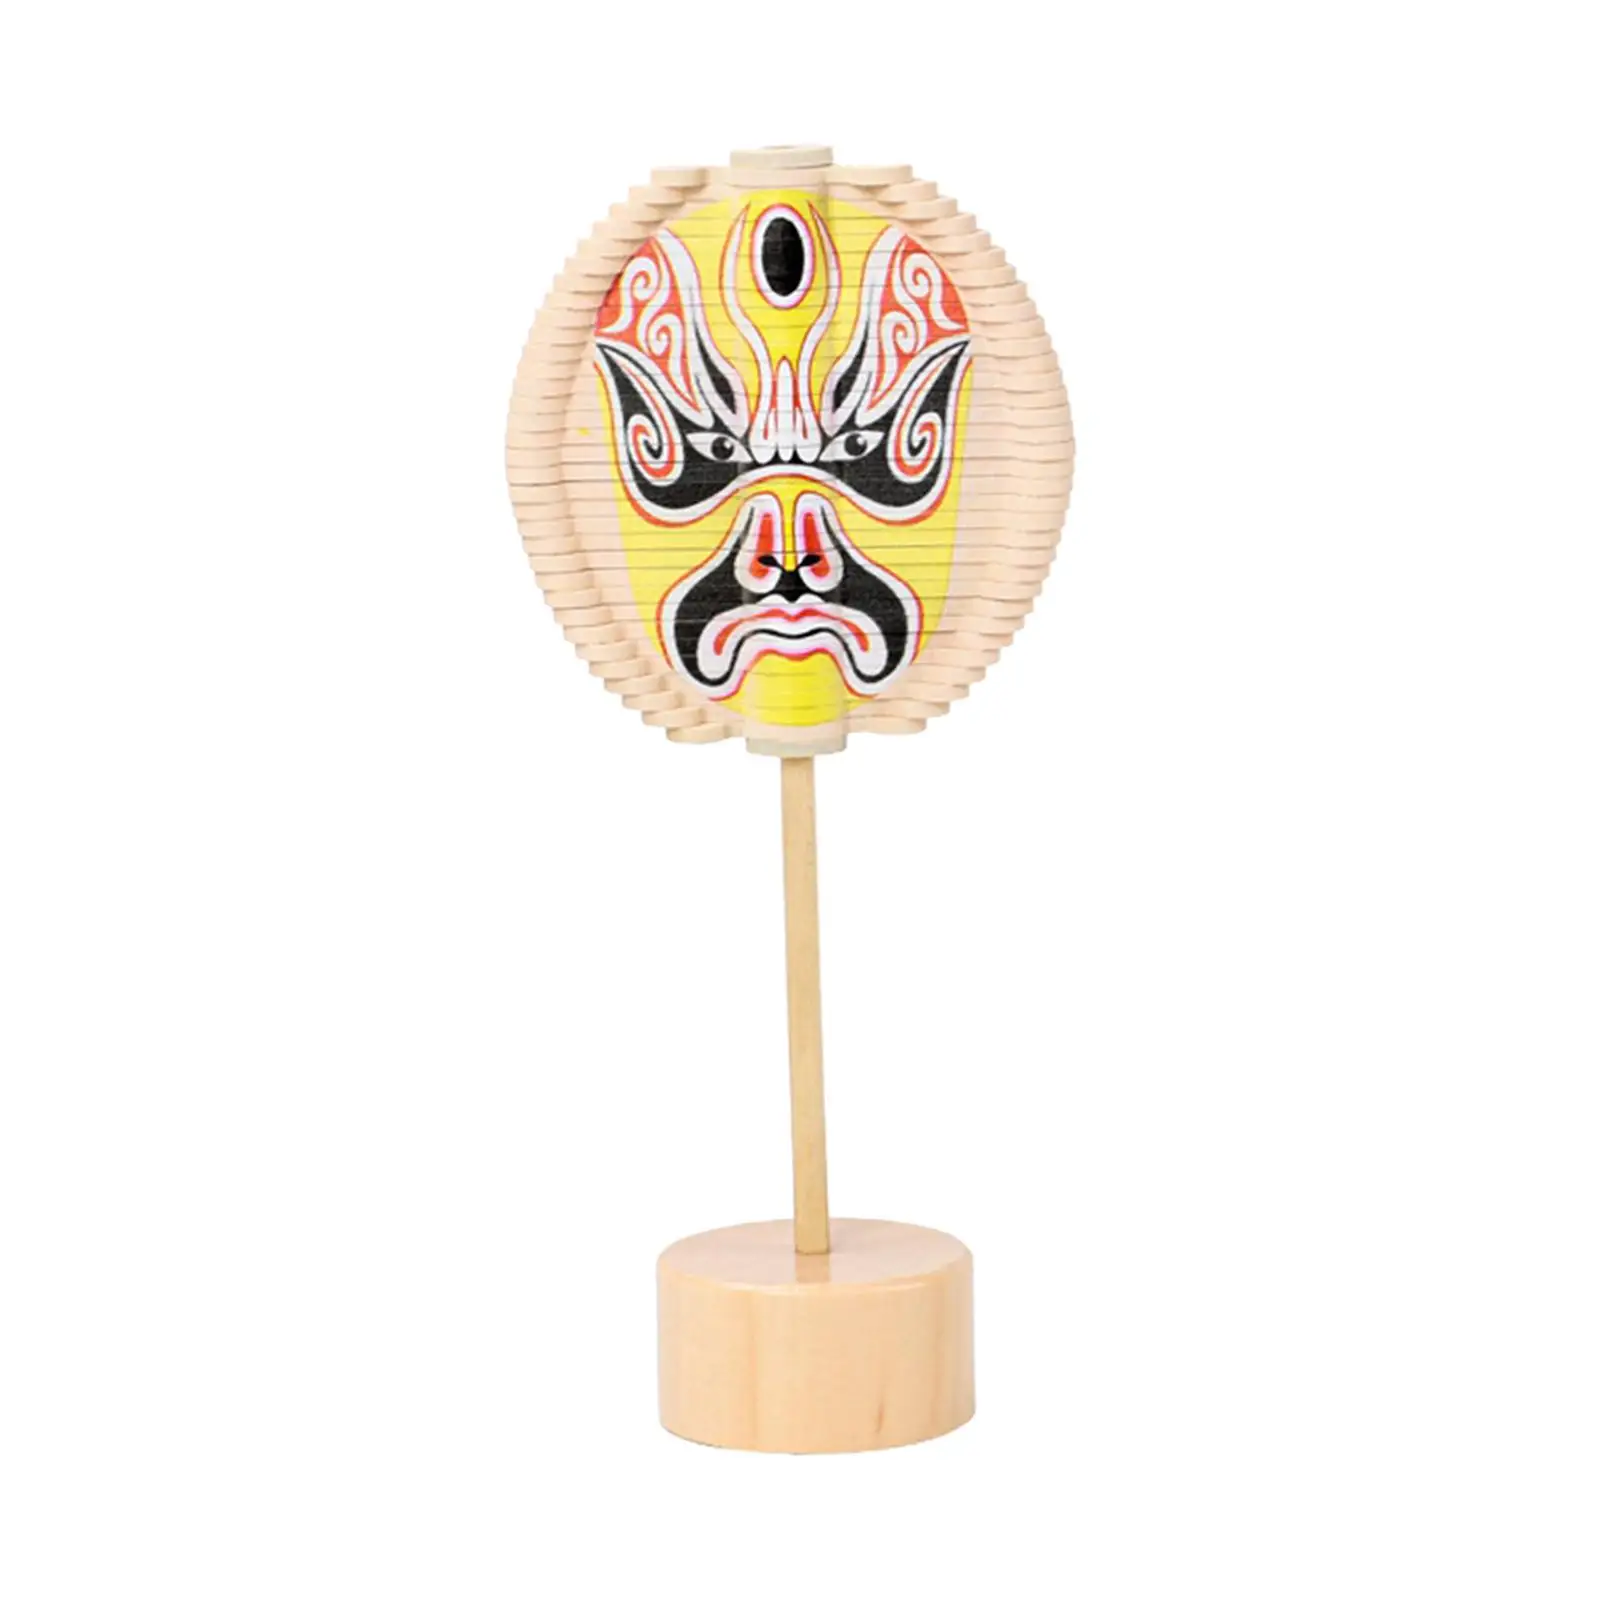 Face Changing Rotating Lollipop Tricks Props Desktop Decoration Wooden Rotary Spiral Lollipop for Christmas Birthday Gift Party